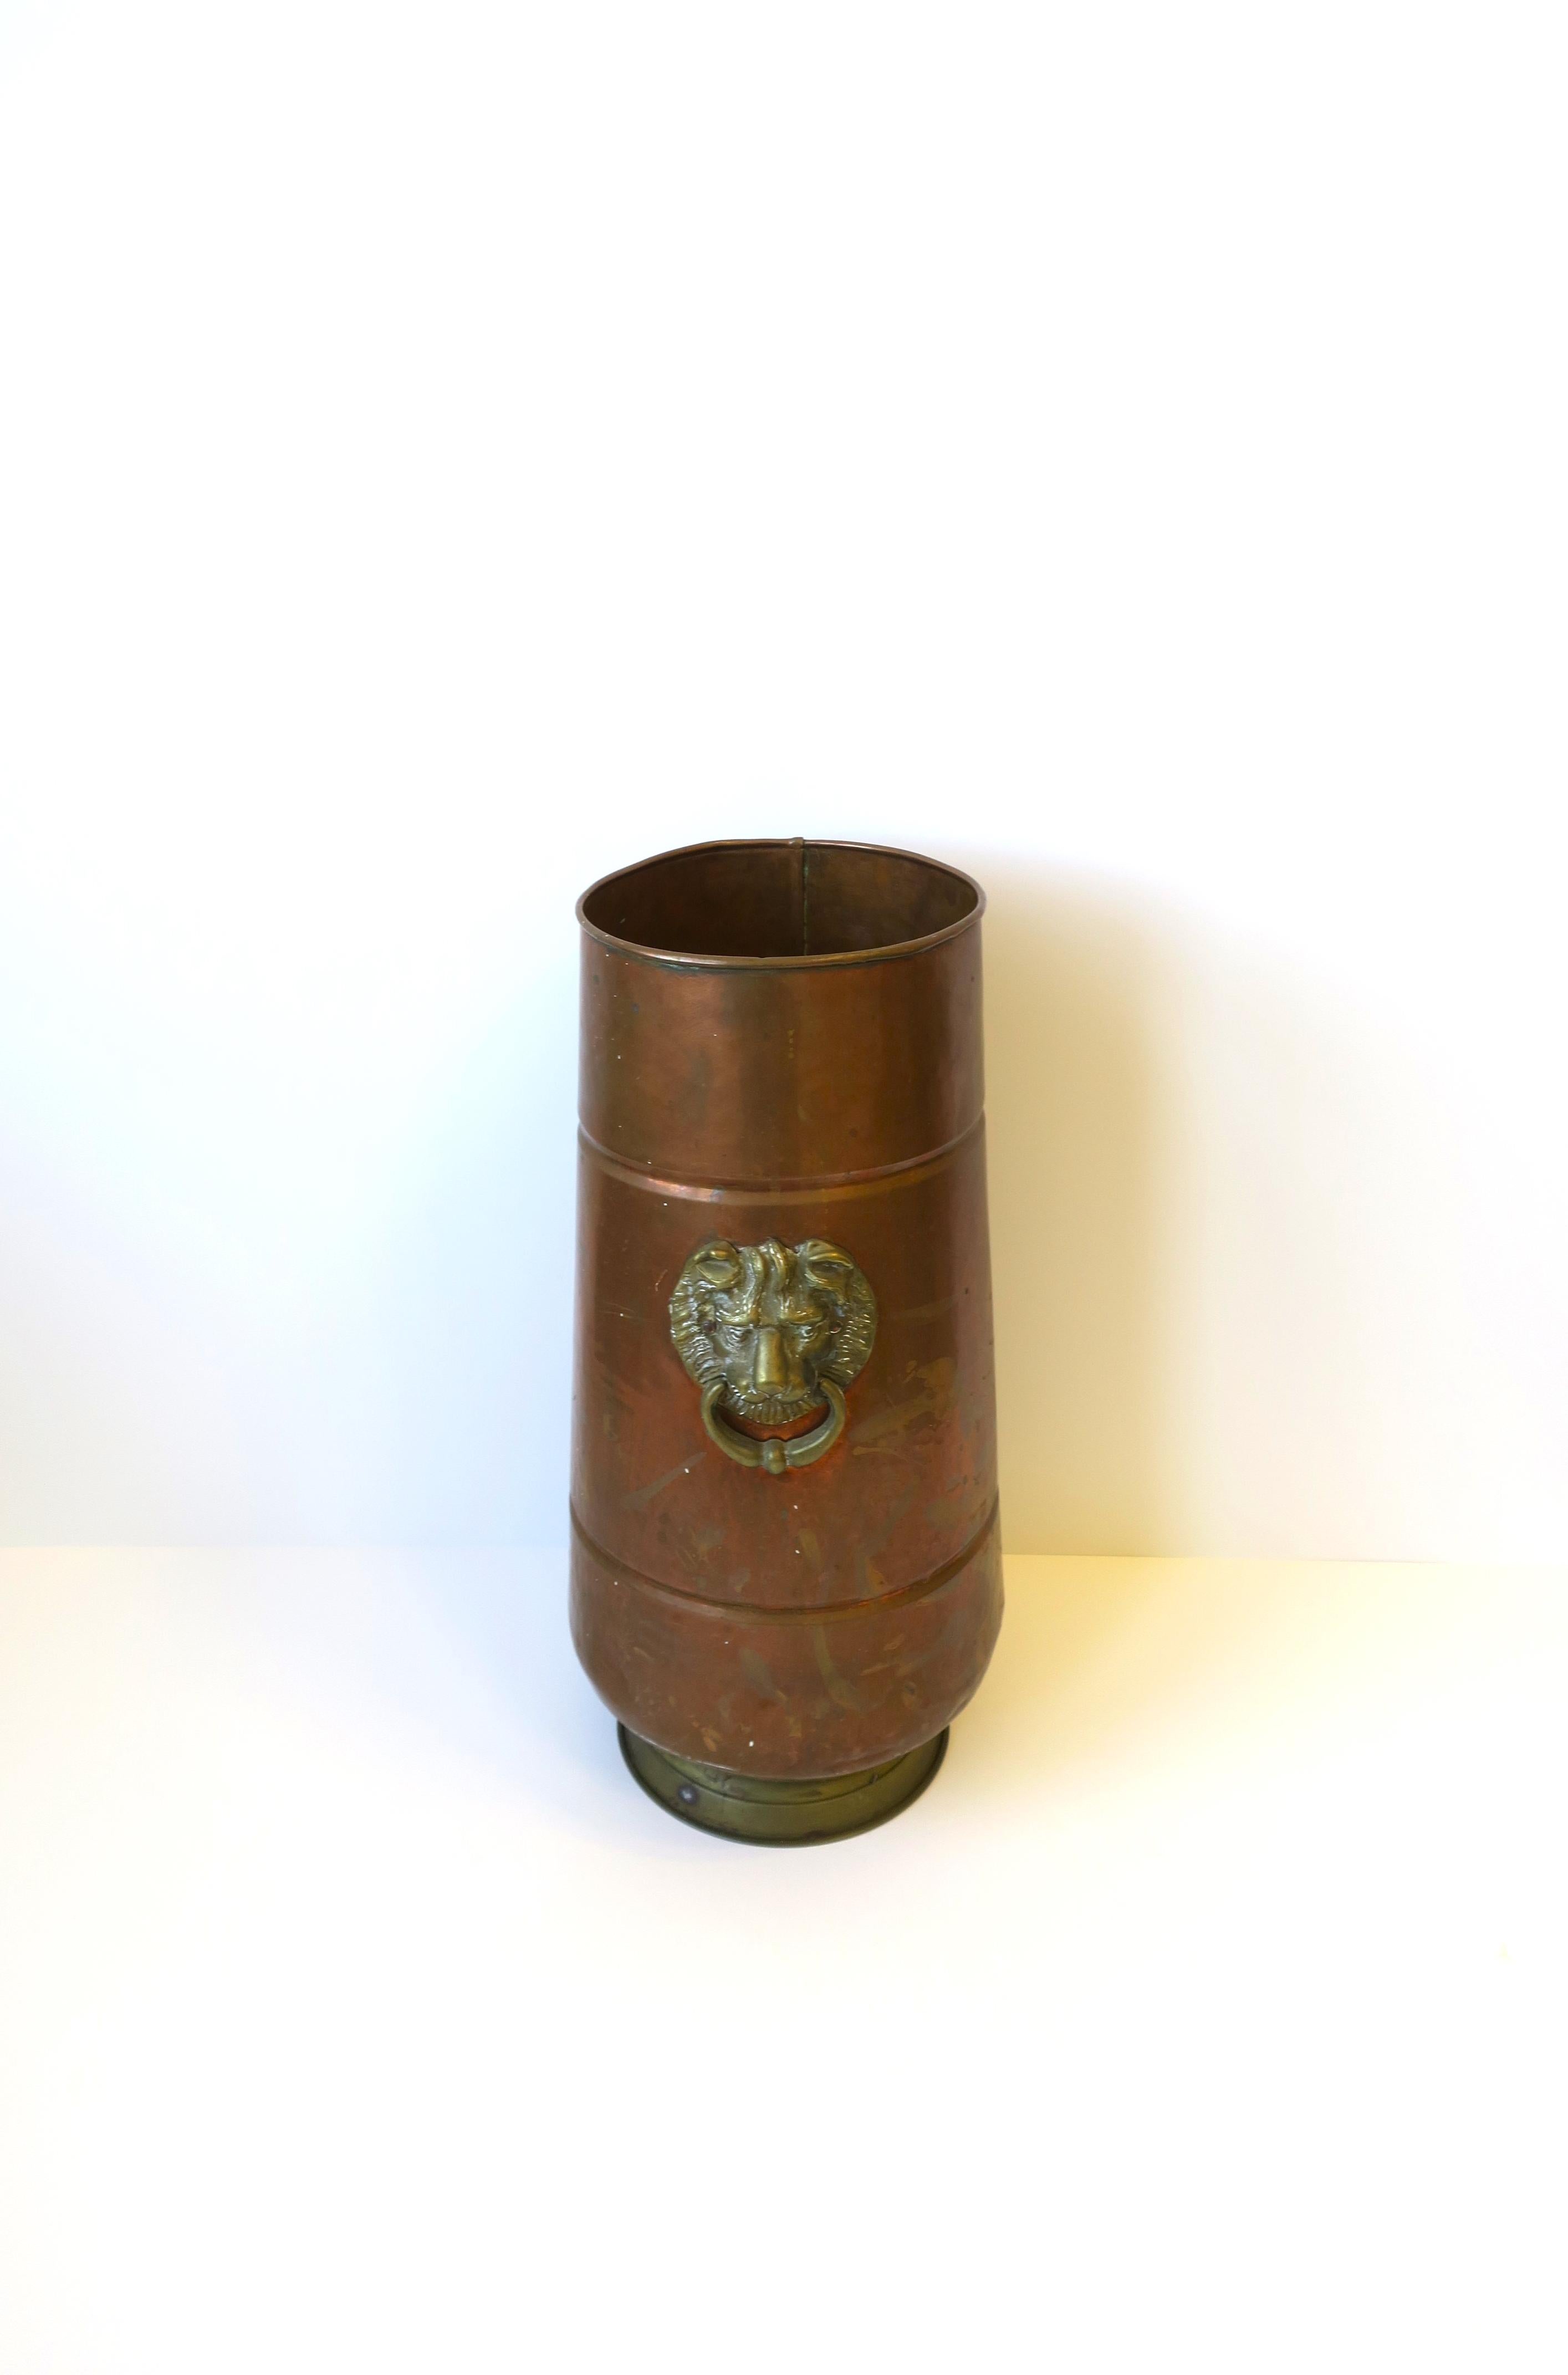 European Umbrella Holder Stand in Copper and Brass with Lion Head Design Regency Style